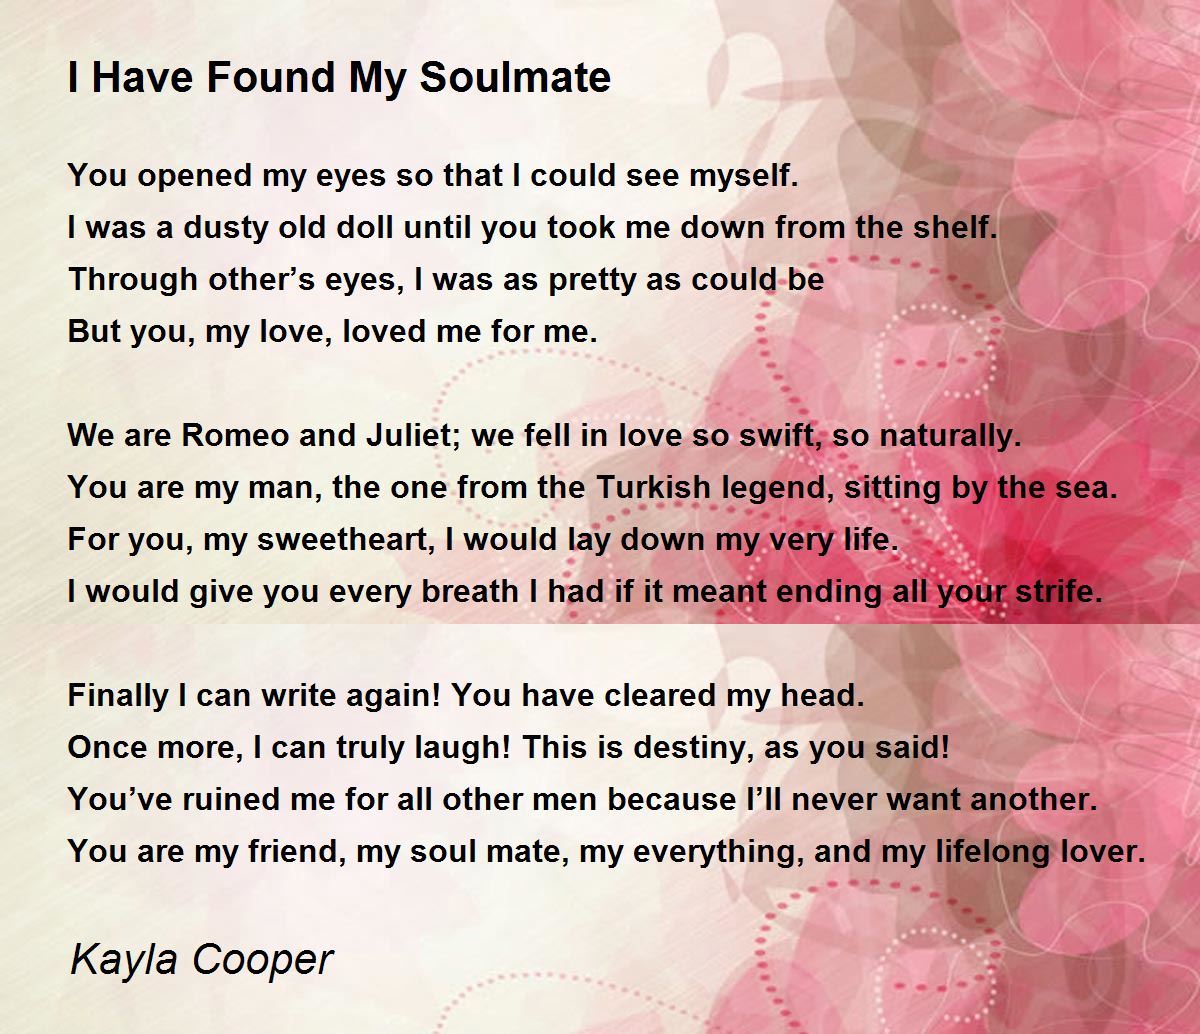 I have found my soulmate poem